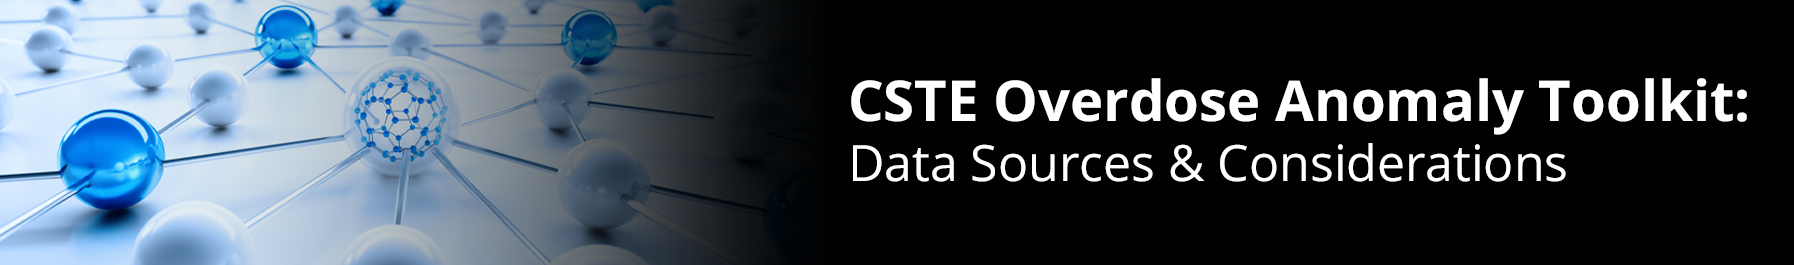 CSTE Overdose Anomaly Toolkit: Data Sources and Considerations